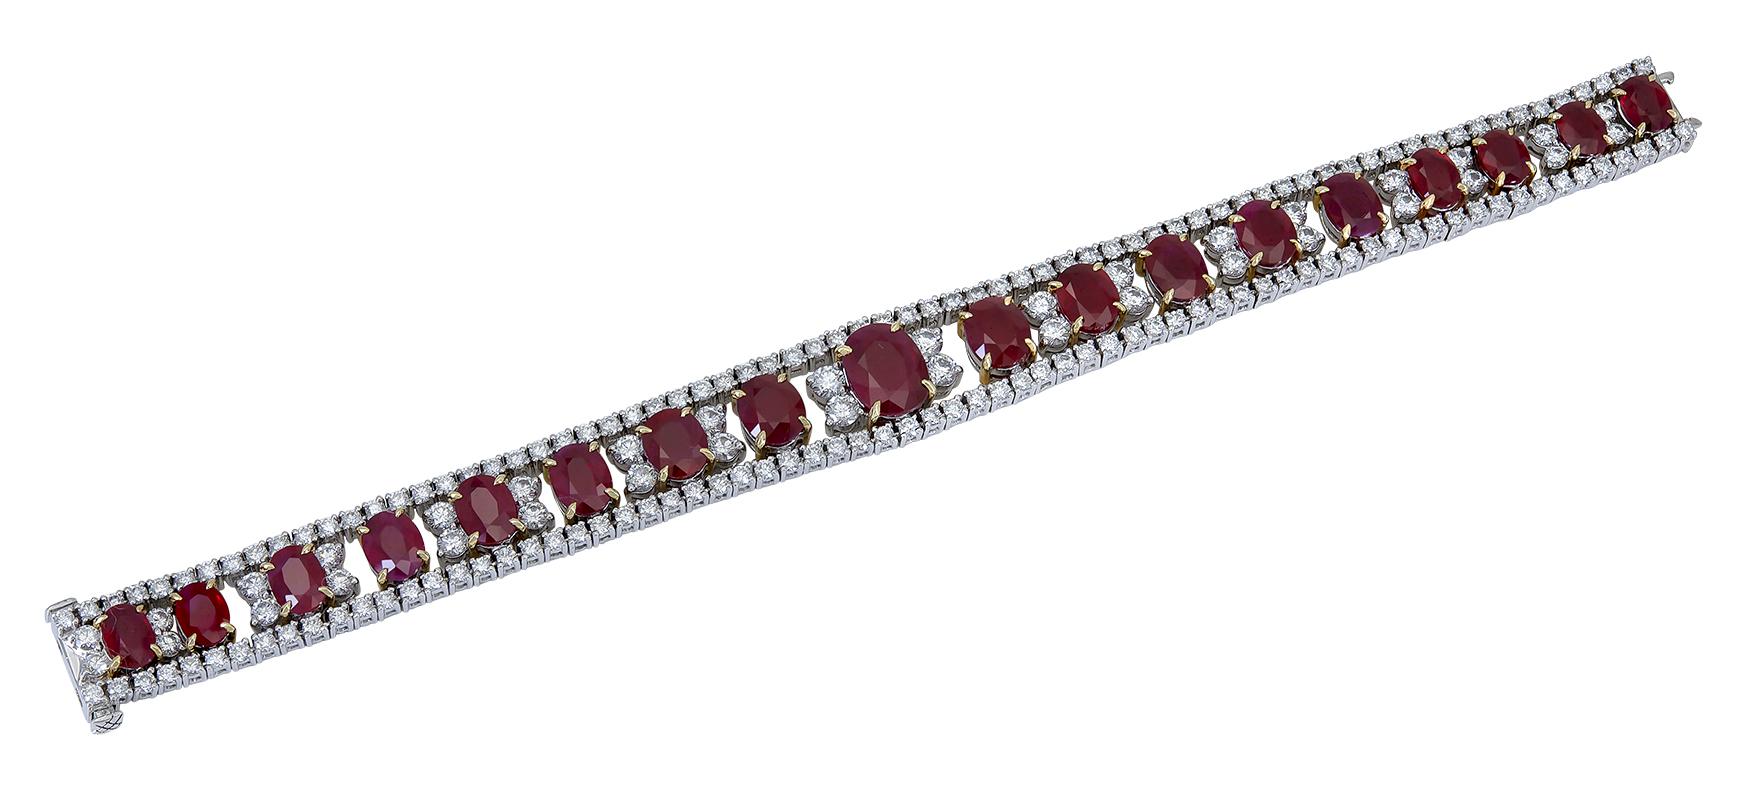 Features vibrant red oval cut rubies weighing 28.70 carats, set in an open-work design accented with round brilliant diamonds. Diamonds weigh 8.99 carats total and are approximately G-H color, VS clarity.
Rubies are heated and of Burmese